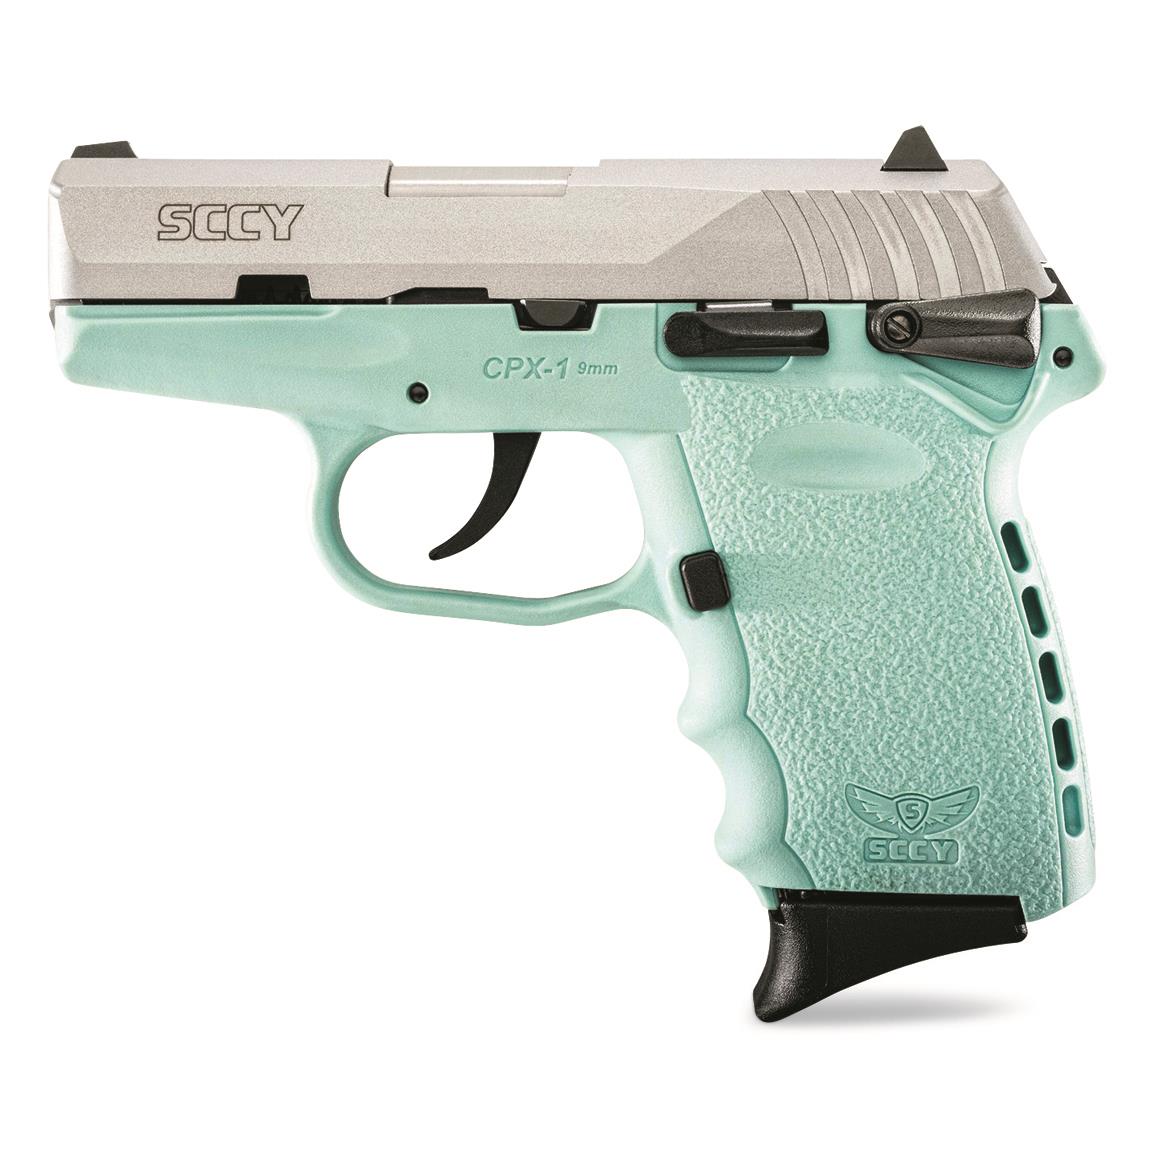 SCCY CPX-1, Semi-automatic, 9mm, 3.1" Barrel, Blue/Stainless, 10+1 Rounds